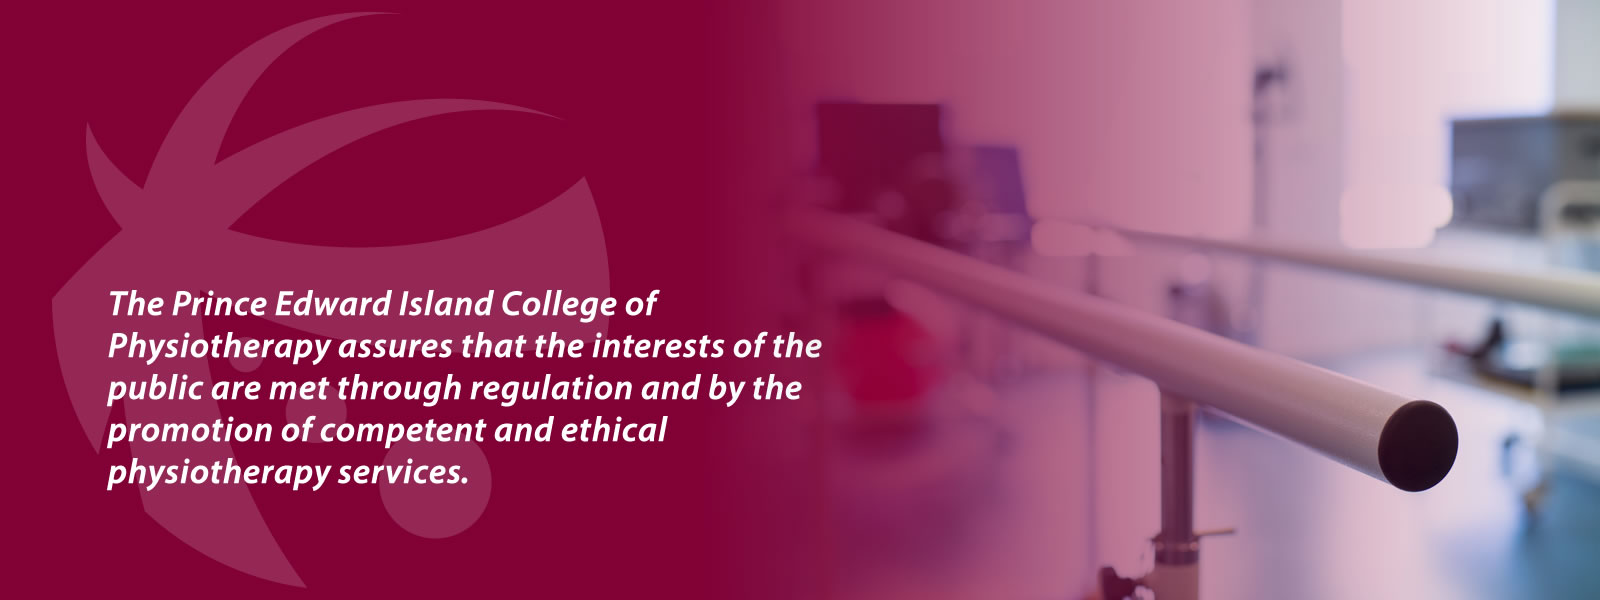 The Prince Edward Island College of Physiotherapy assures that the interests of the public are met through regulation and by the promotion of competent and ethical physiotherapy services.